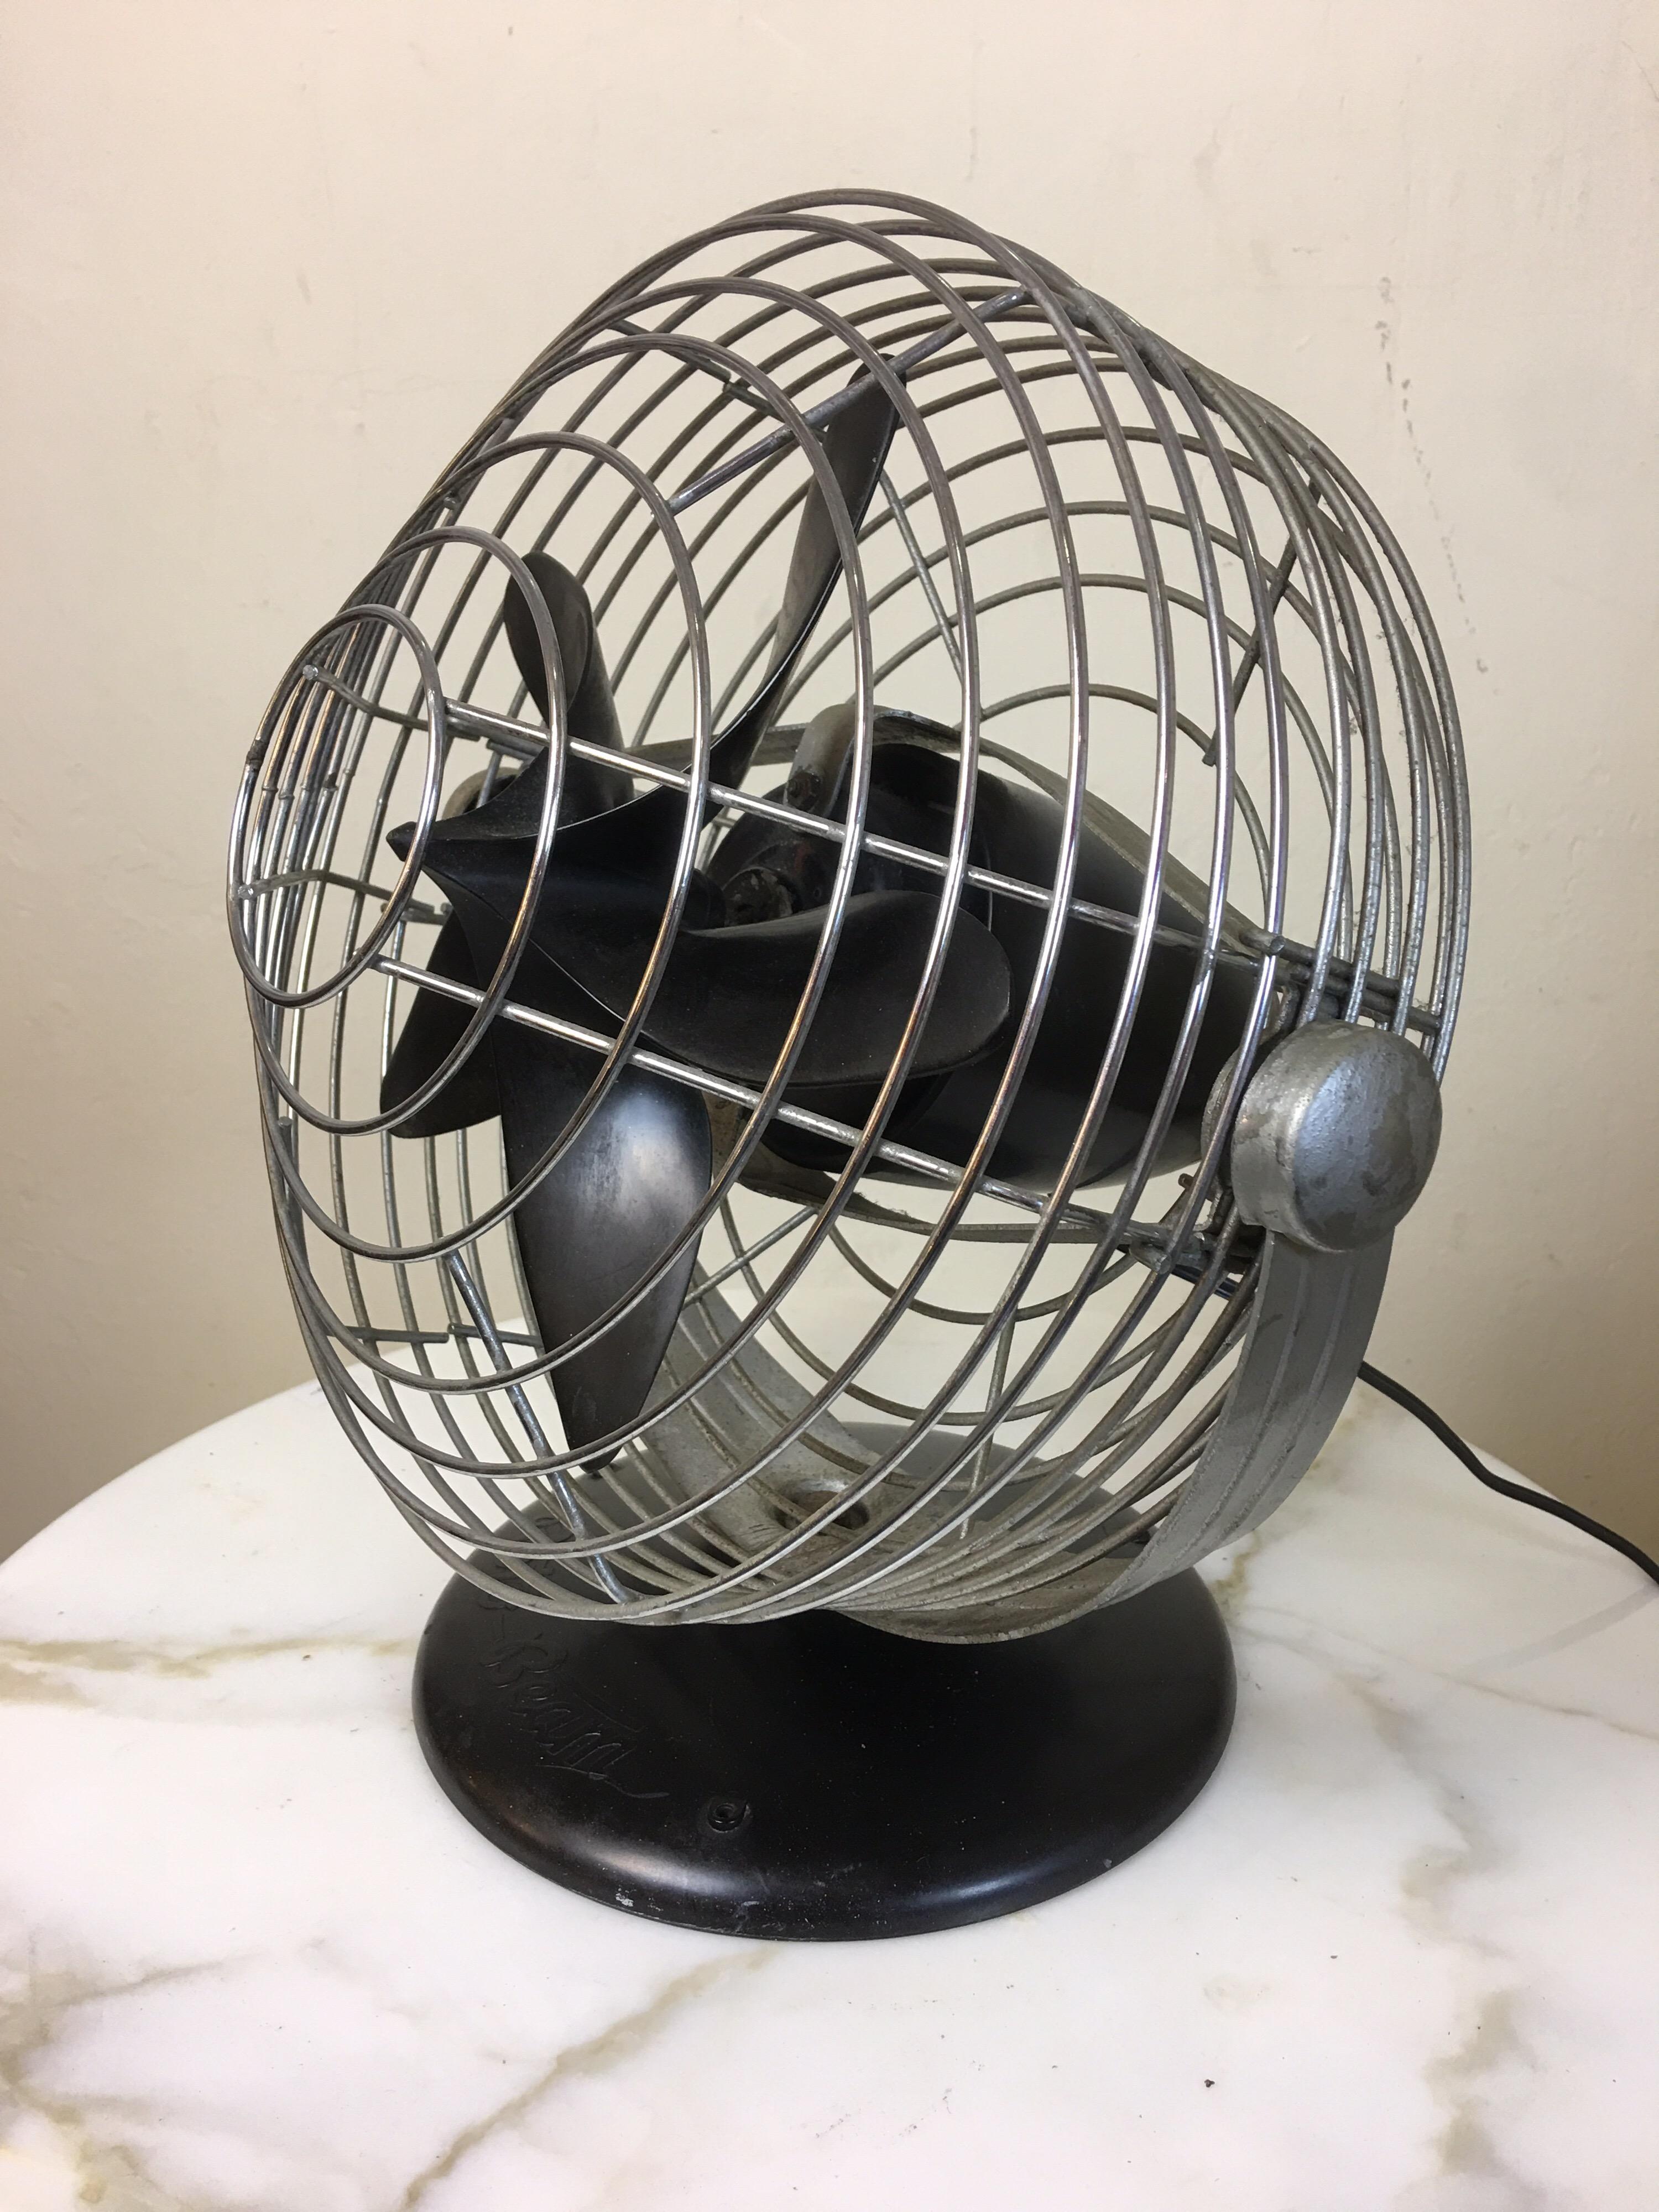 Roto beam Machine Age table fan designed by Max Weber. Unique Bakelite base and blade gives this fan a great look! Pull chain switch located at the back of motor. As quiet as a fan can be.  Original design was patented in 1937, this model is from